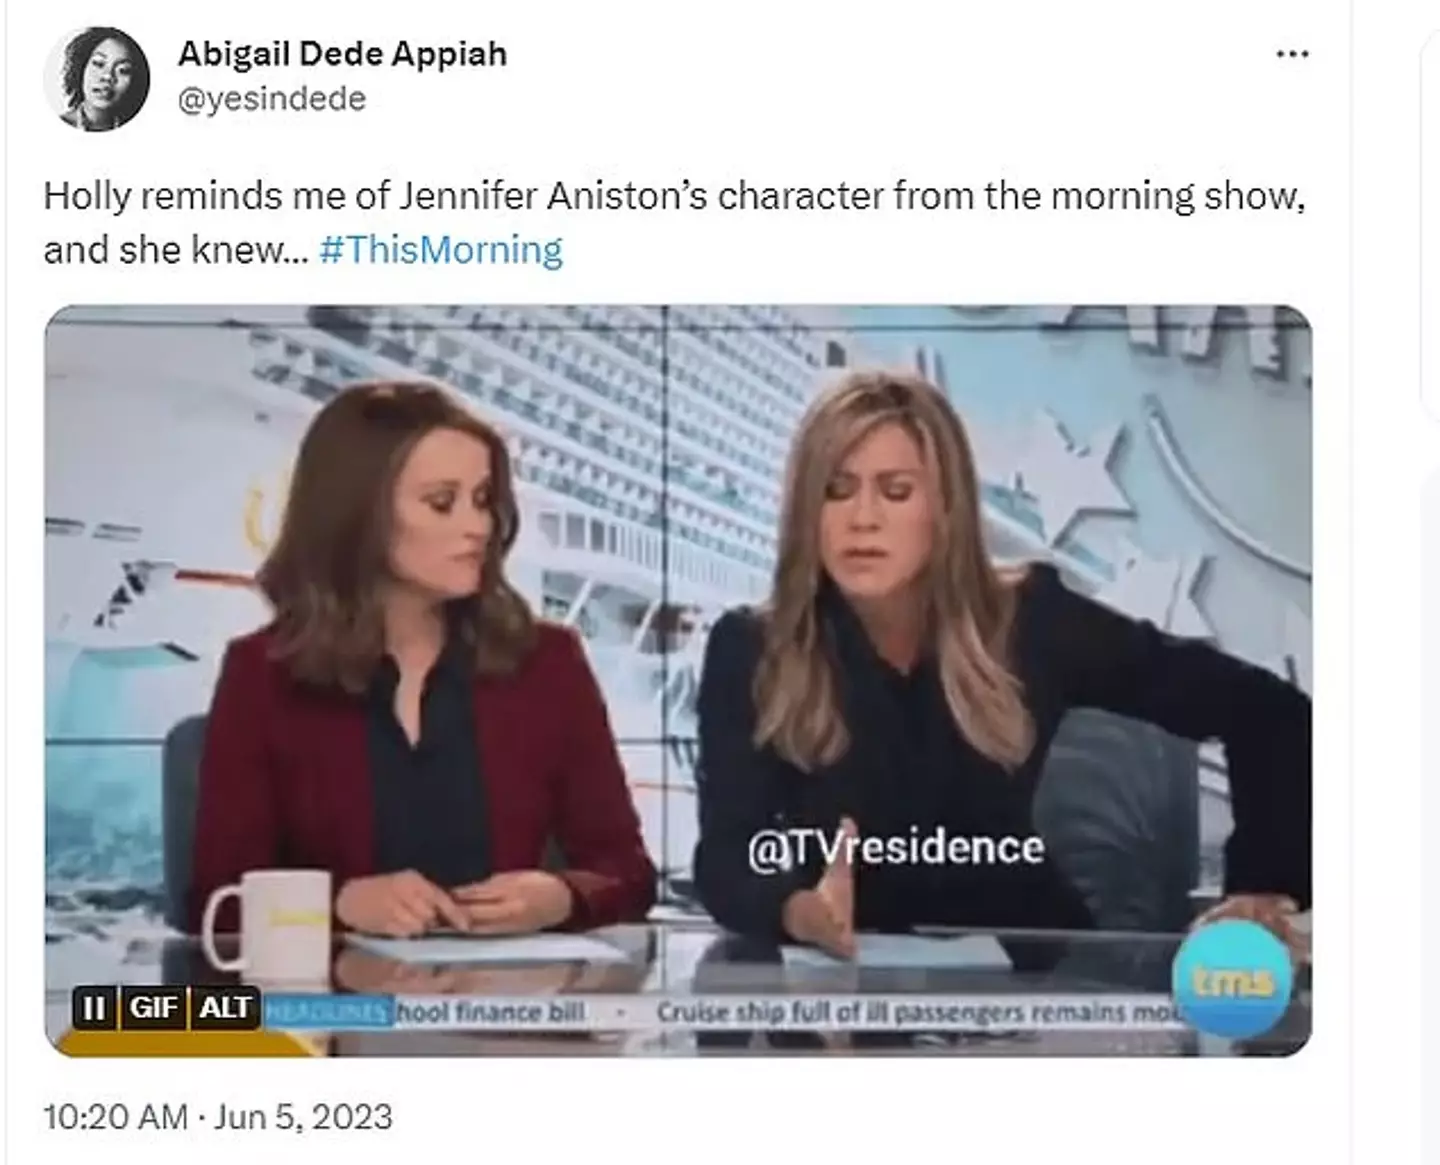 Viewers think Holly Willoughby's statement about Phillip Schofield on This Morning 'mirrored' Jennifer Aniston's in AppleTV+ series The Morning Show.